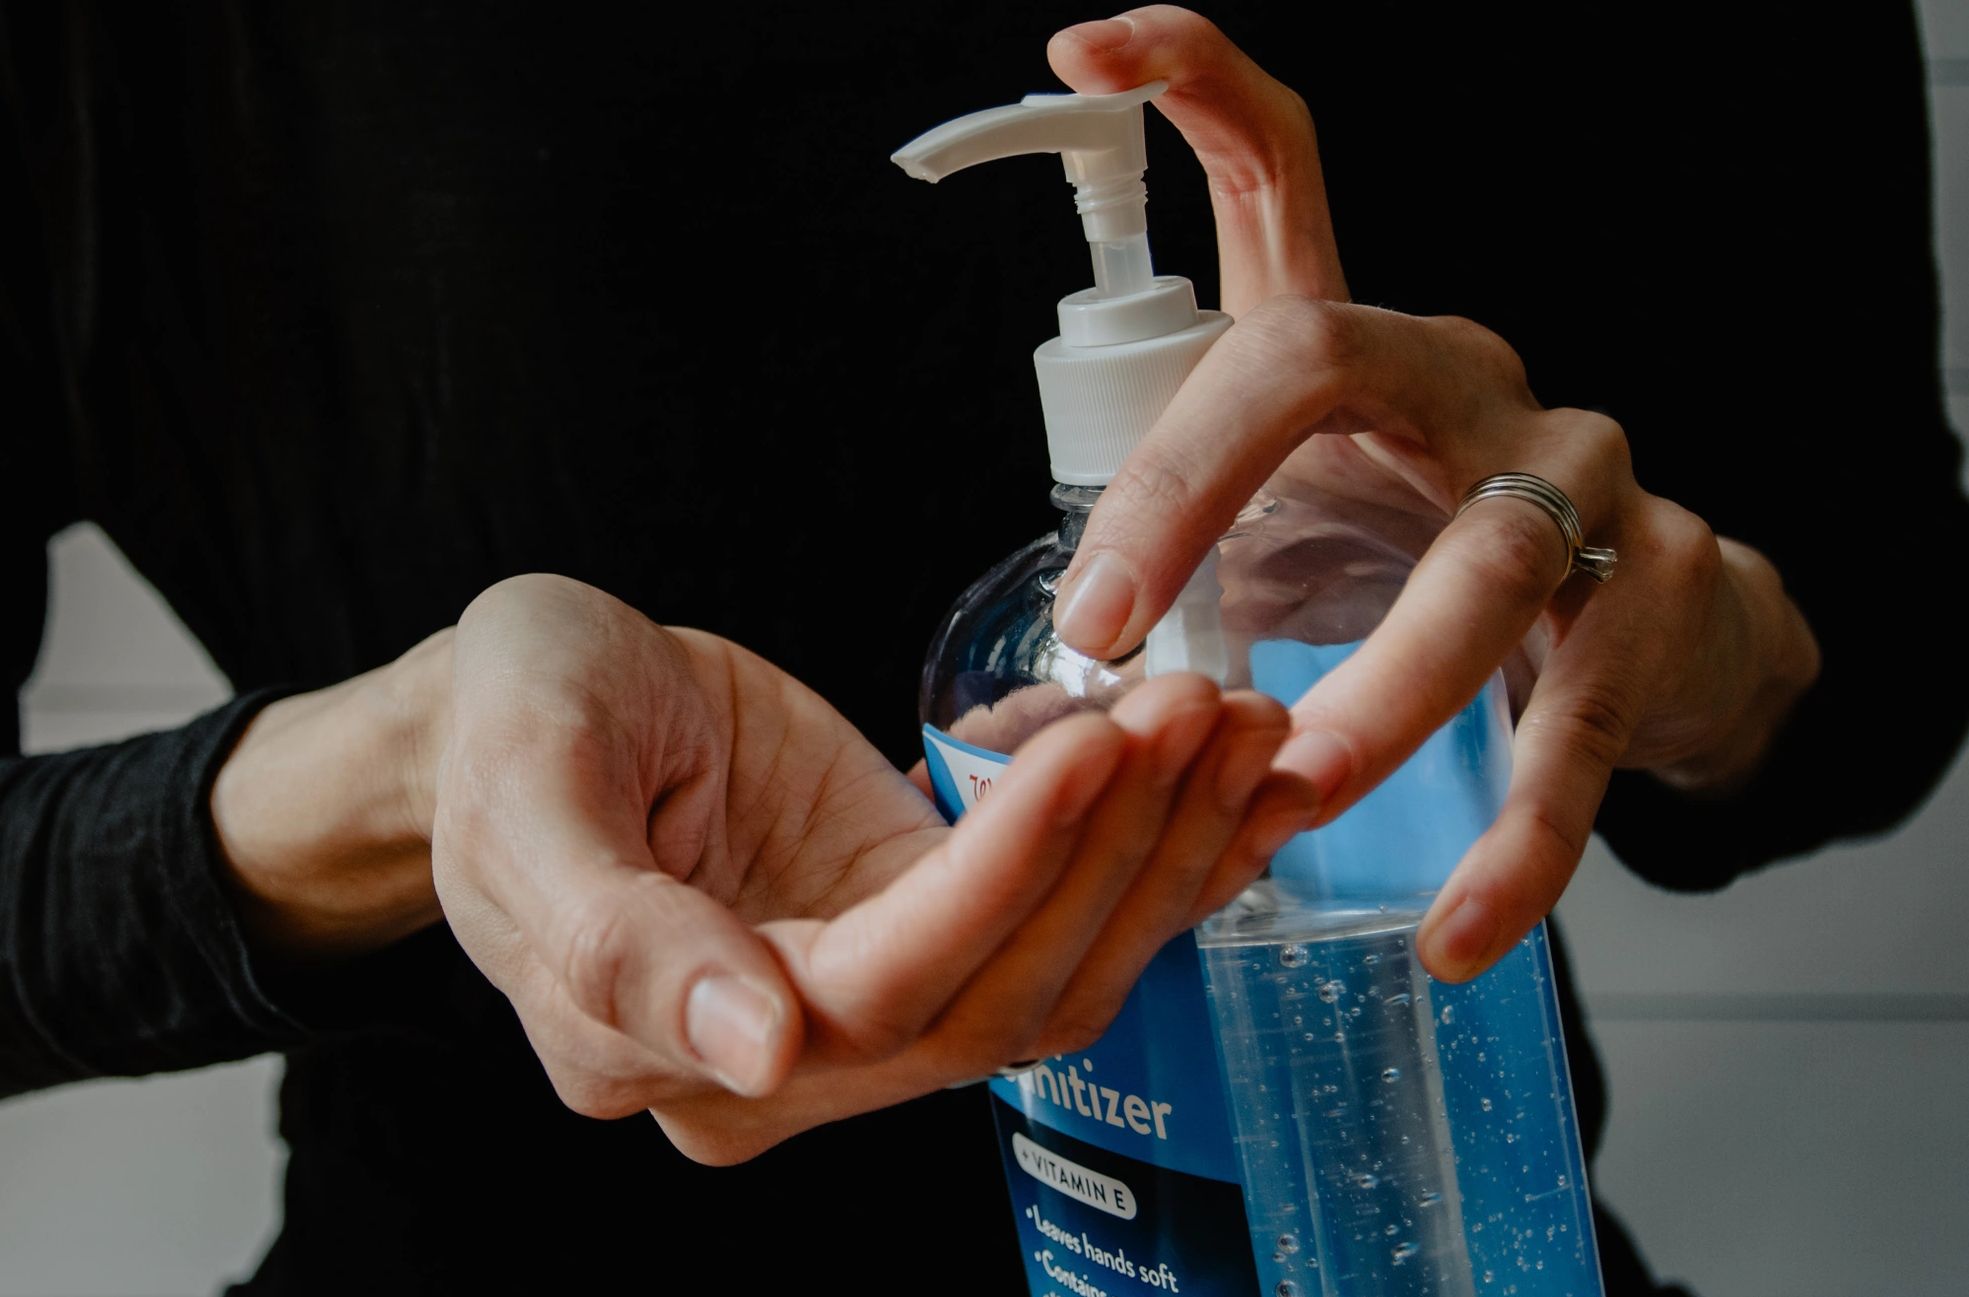 Person using hand sanitiser - Photo by Kelly Sikkema on Unsplash